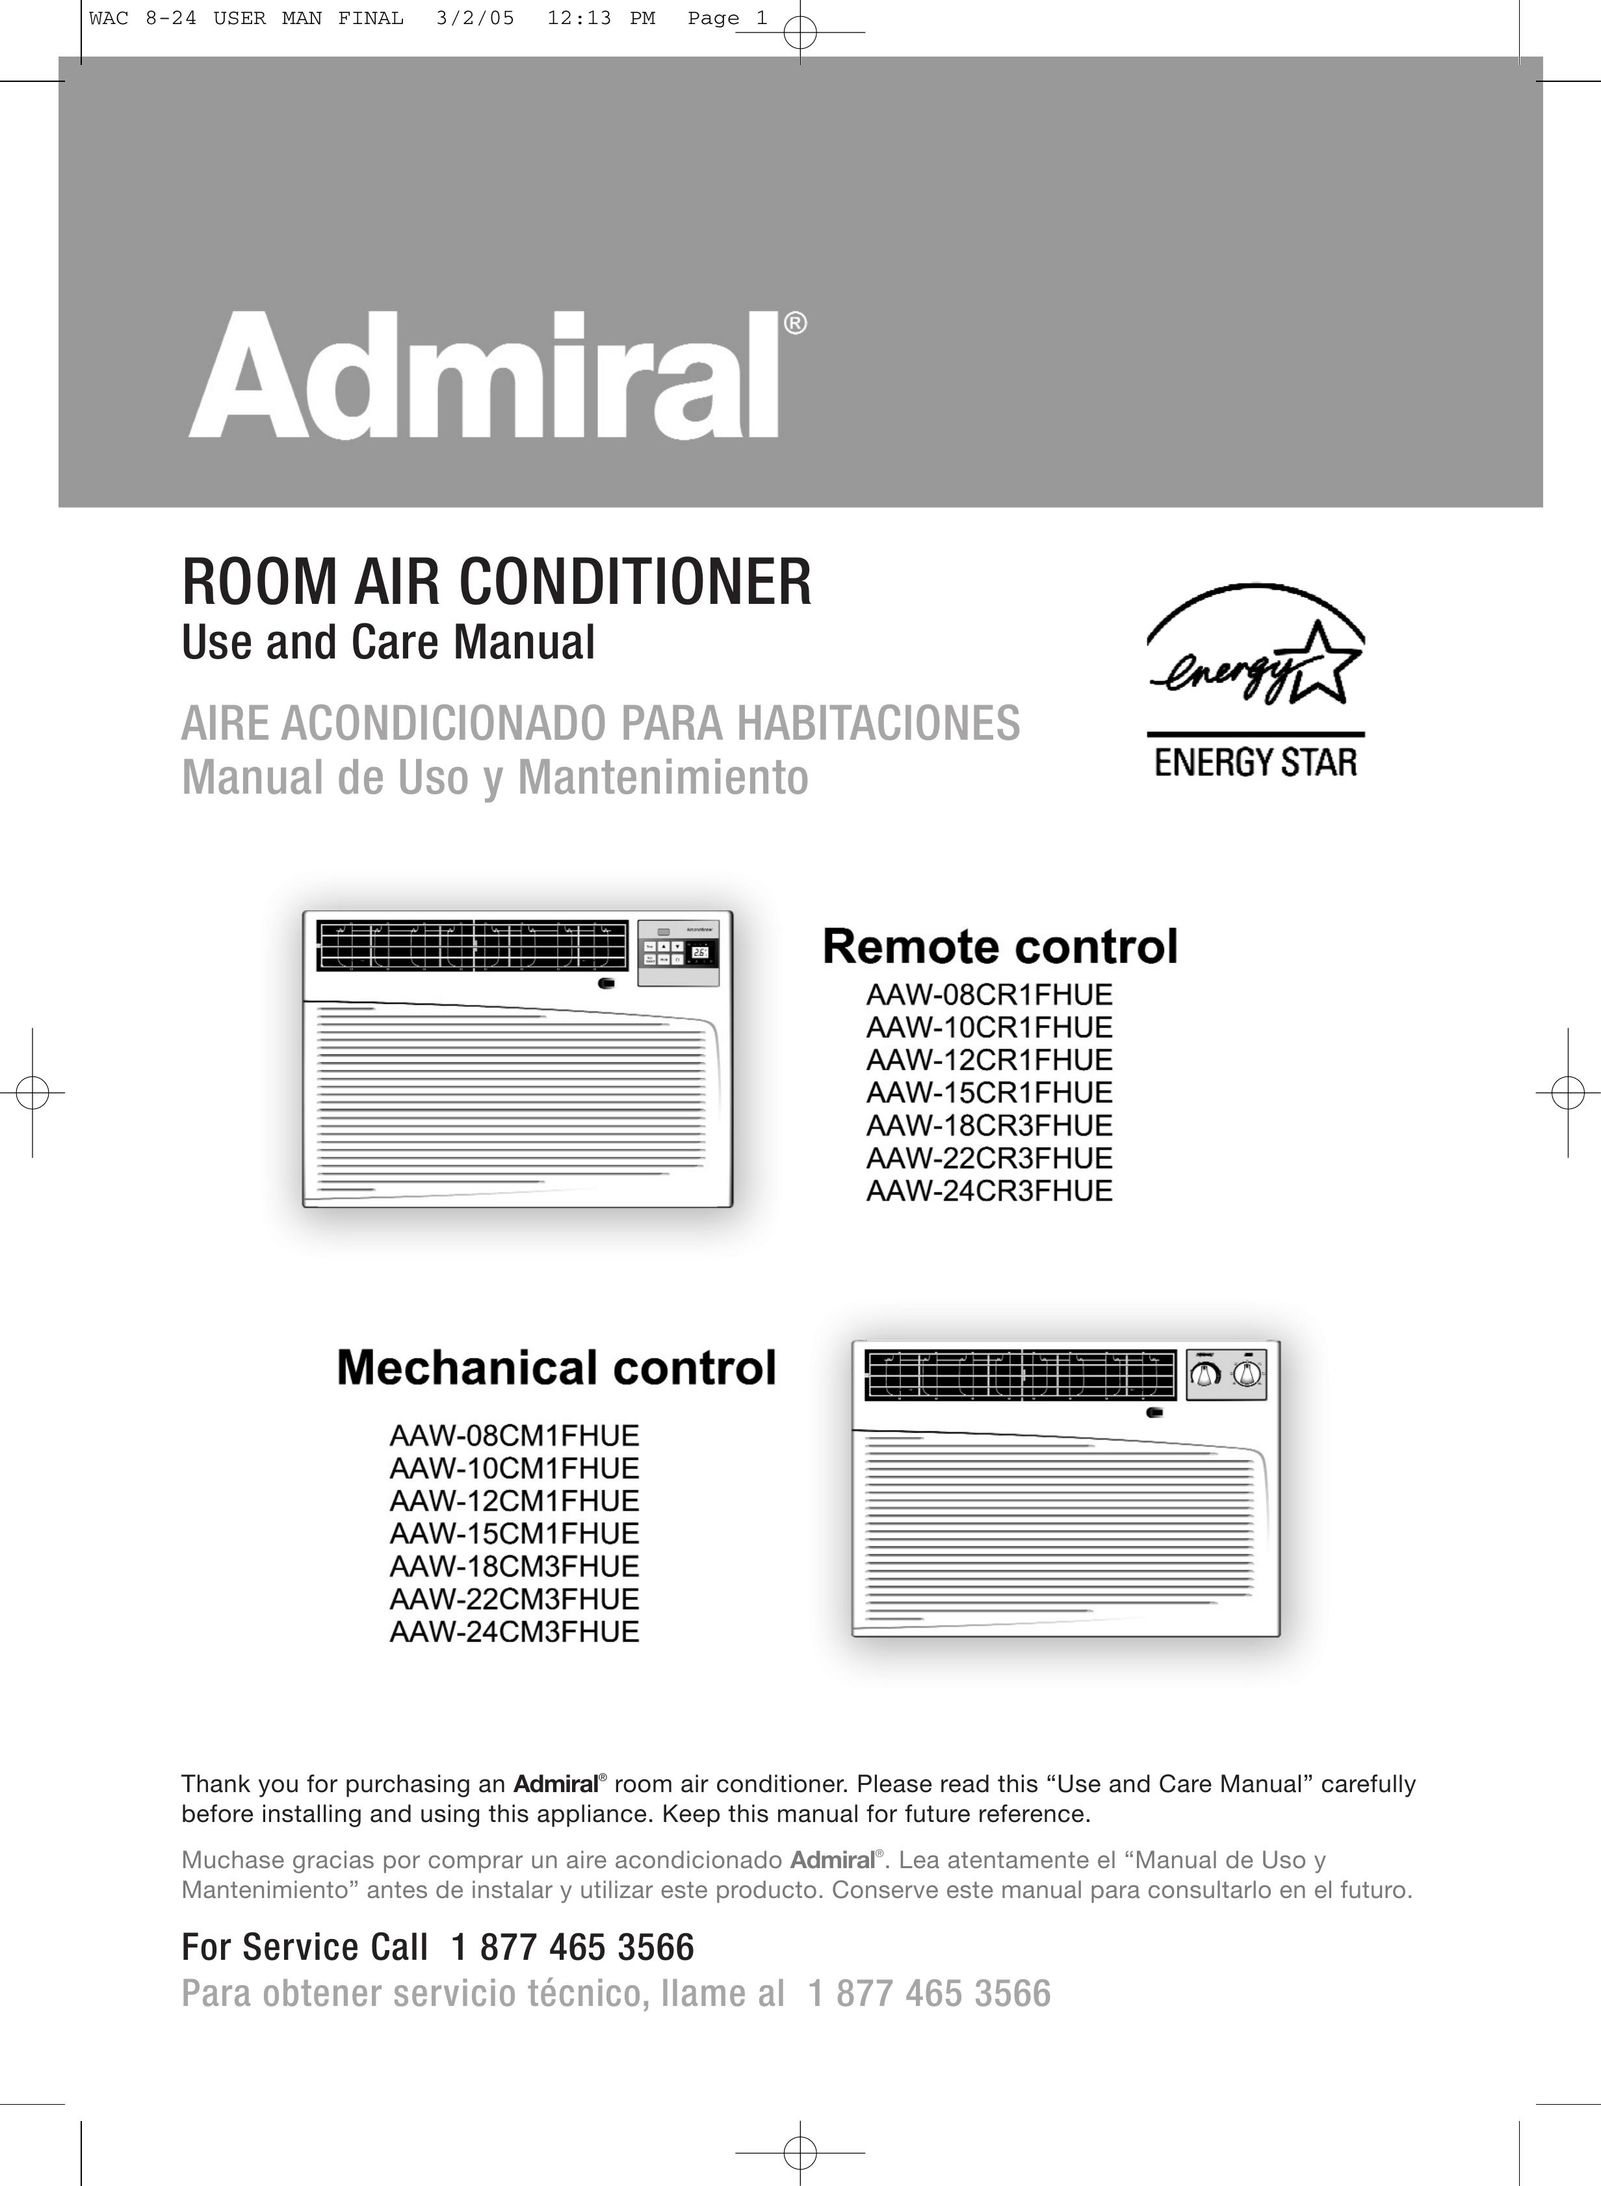 Admiral AAW-24CR1FHUE Air Conditioner User Manual